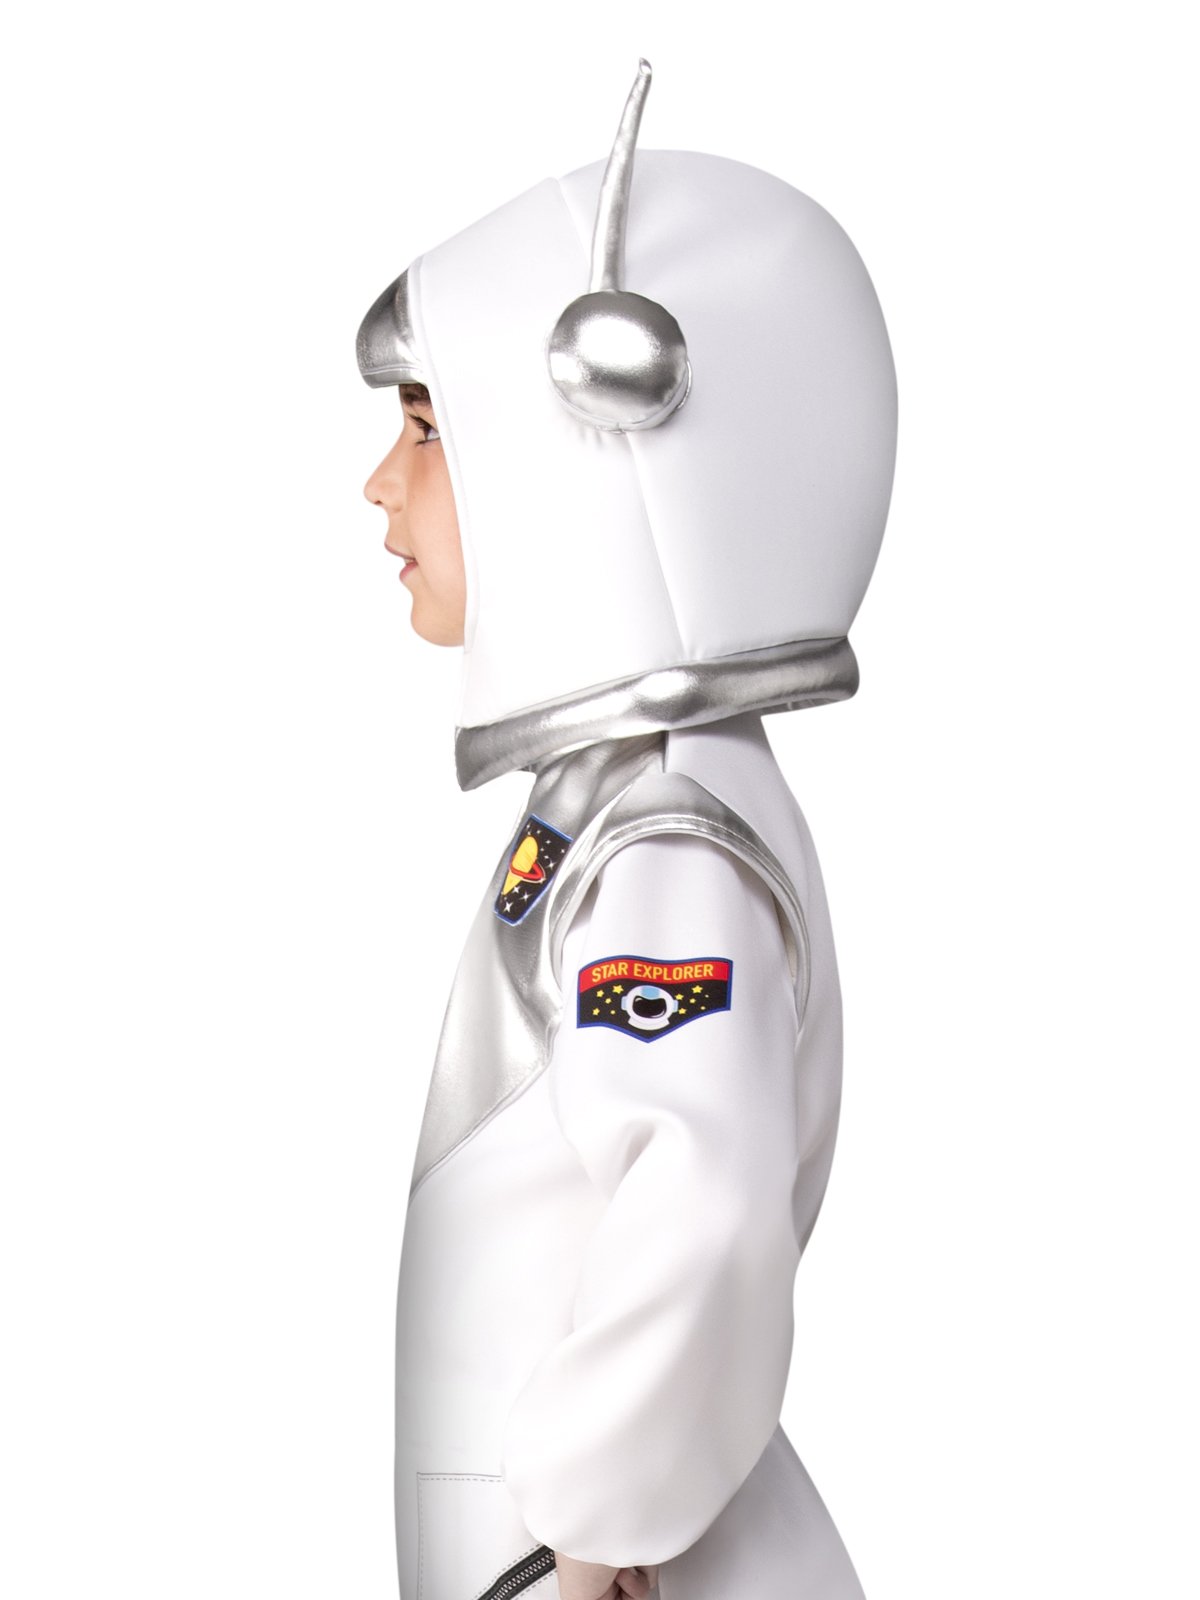 Costume Child Space Suit Large 9-10 Years